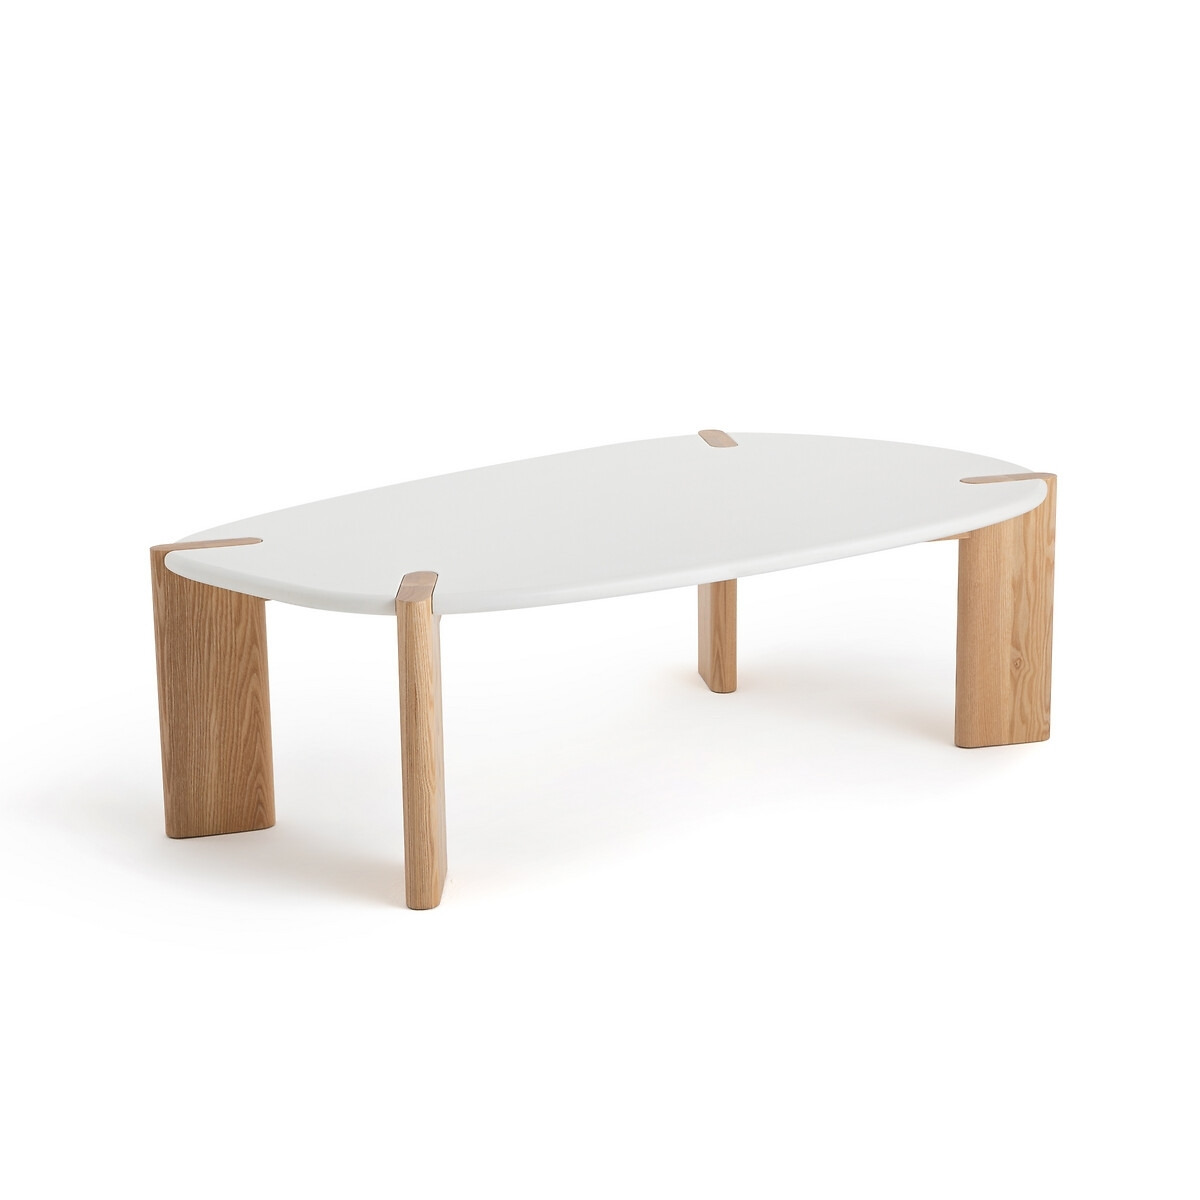 Galet Organically Shaped Beech Coffee Table - image 1